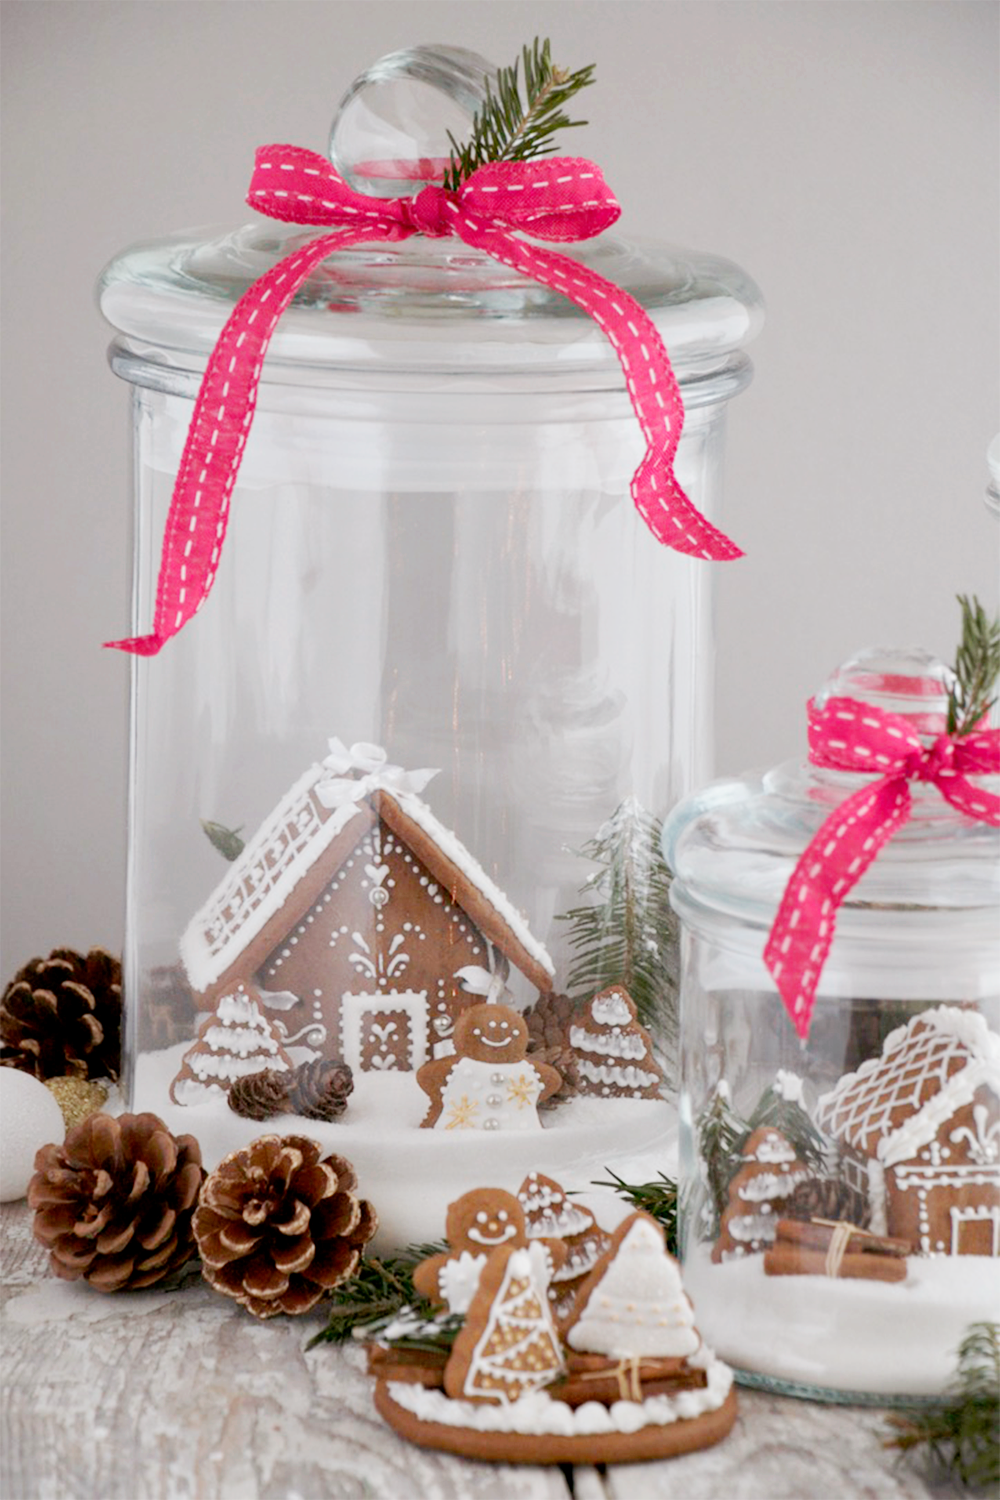 Set your village on your favorite table and accessorize with pine cones and winter greenery.